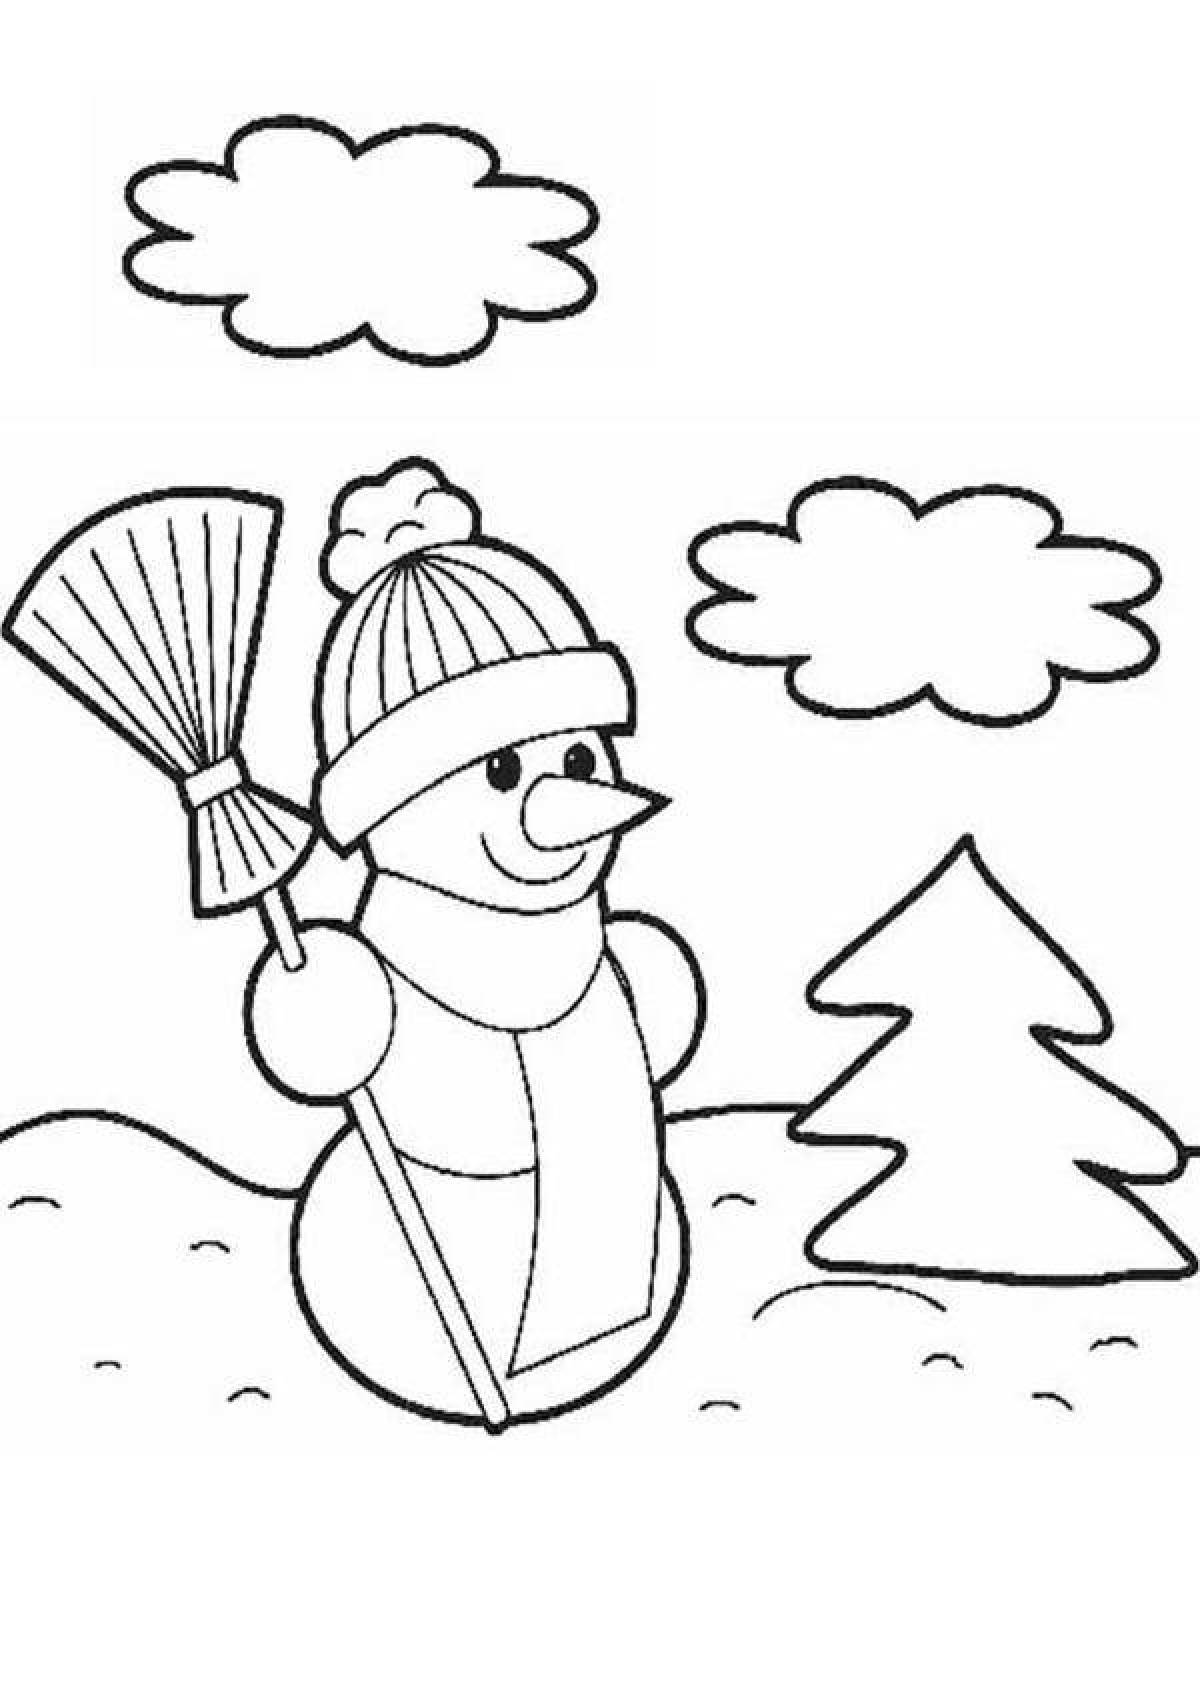 Playful coloring winter for children 5 years old